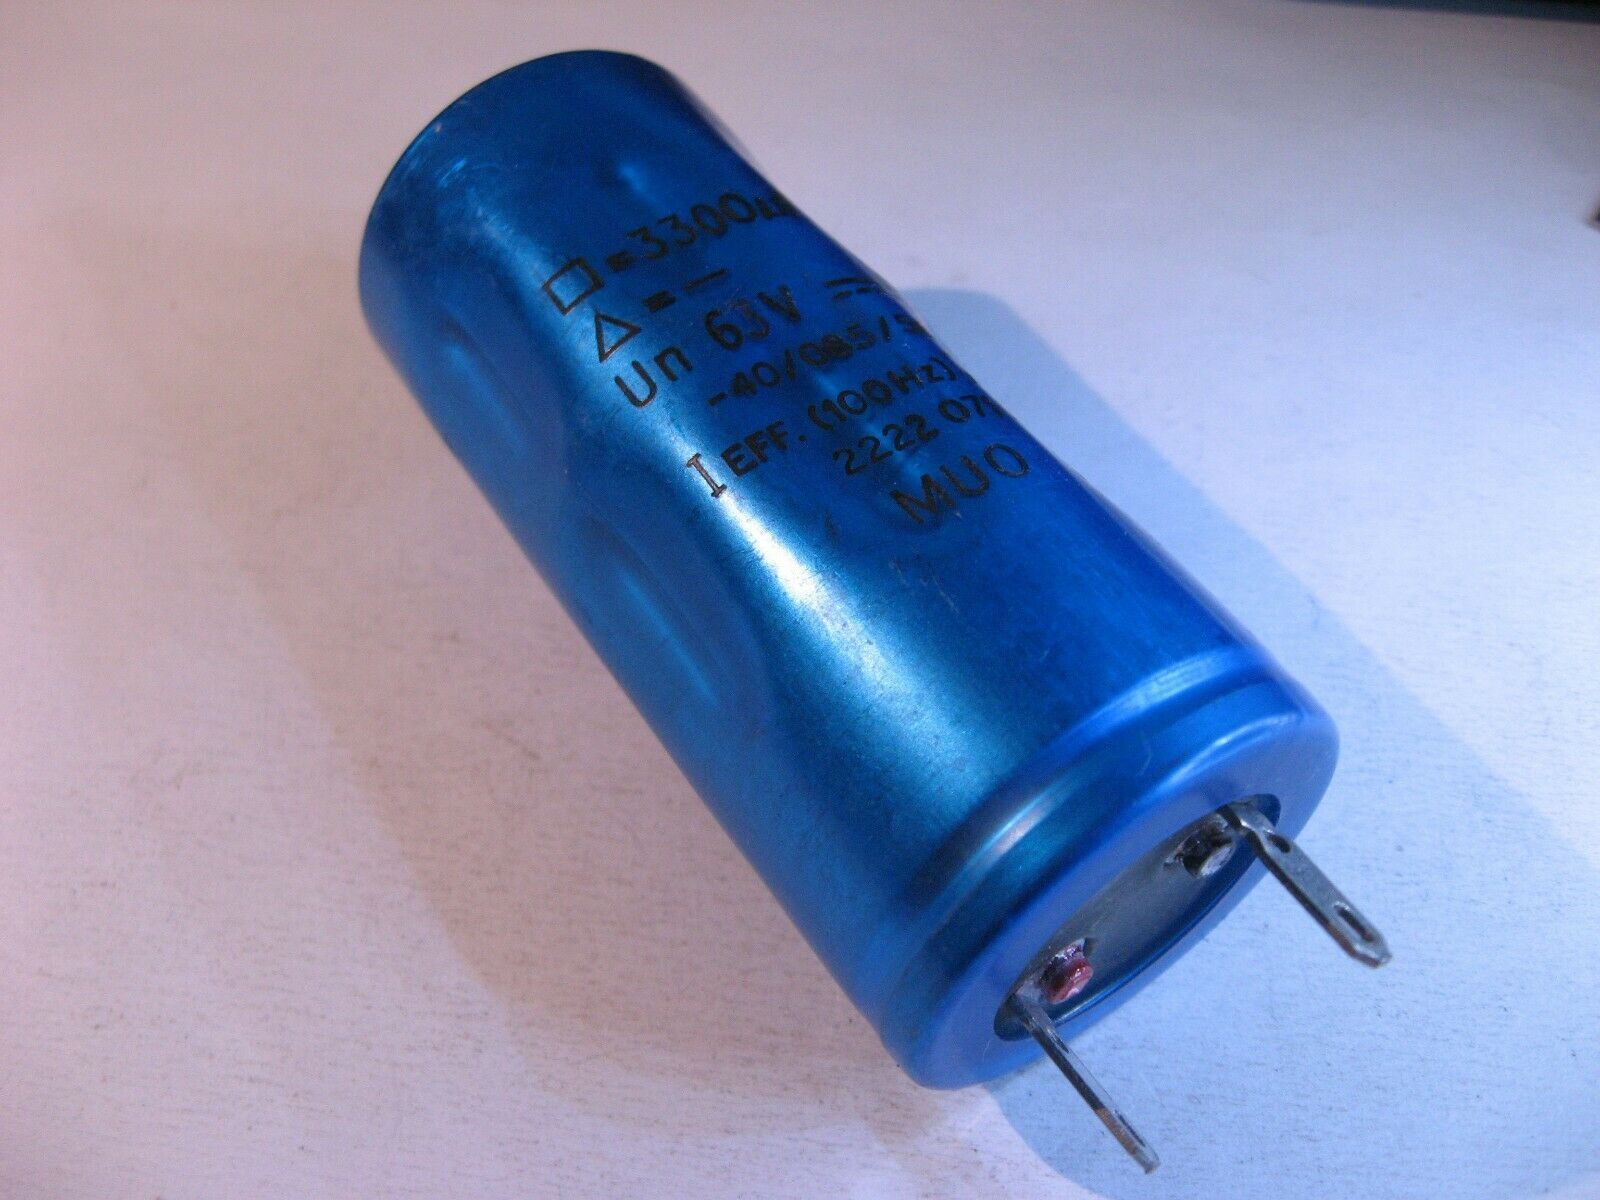 Electrolytic Capacitor 3300uF 63V 85C Philips 2222-071-18332 - NOS Qty 1 - $9.49